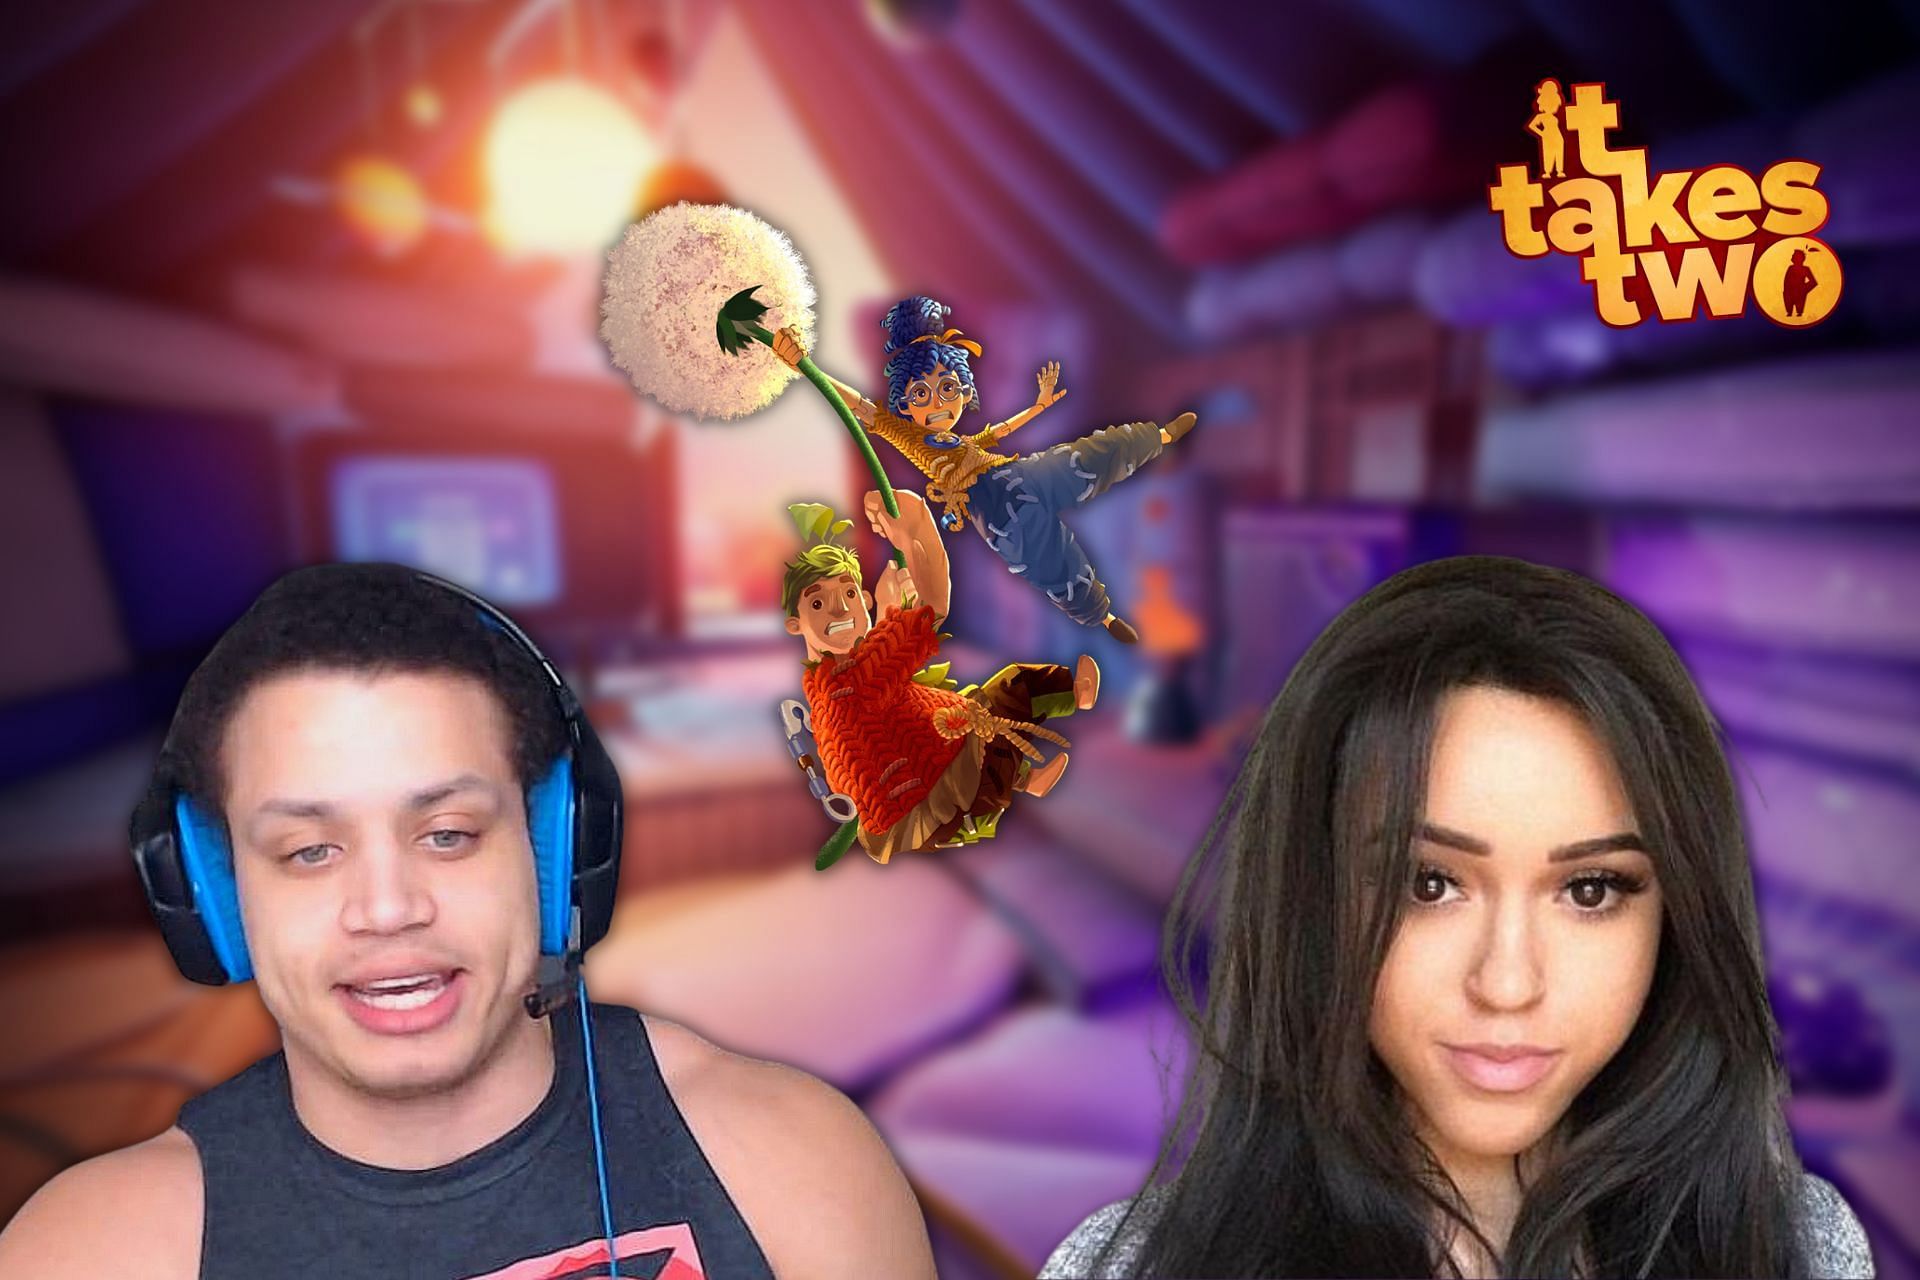 Tyler1 rages after losing mini-game to Macaiyla repeatedly (Image via Sportskeeda)